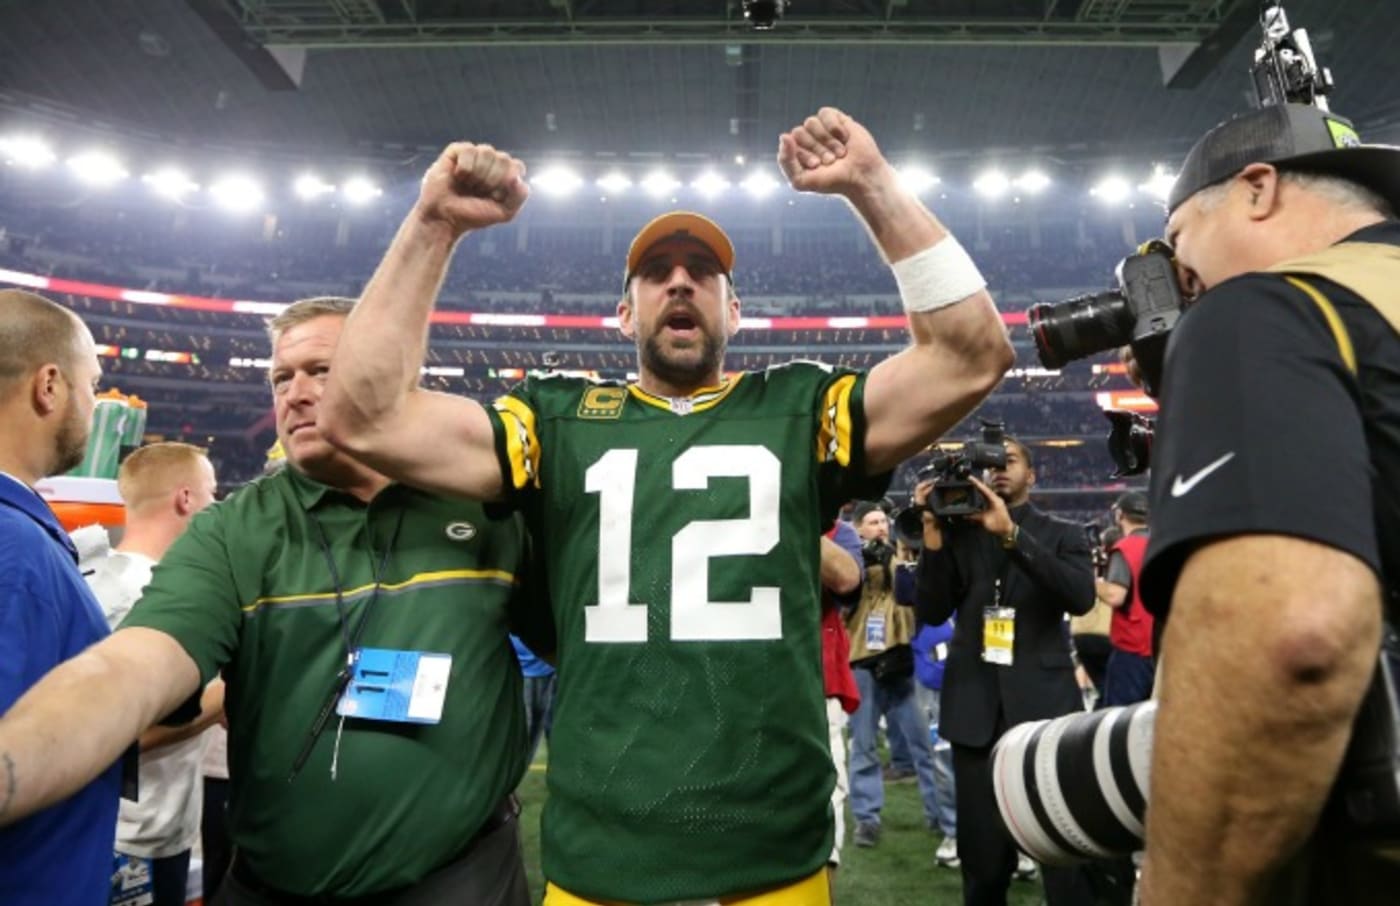 Aaron Rodgers celebrates win over Cowboys.